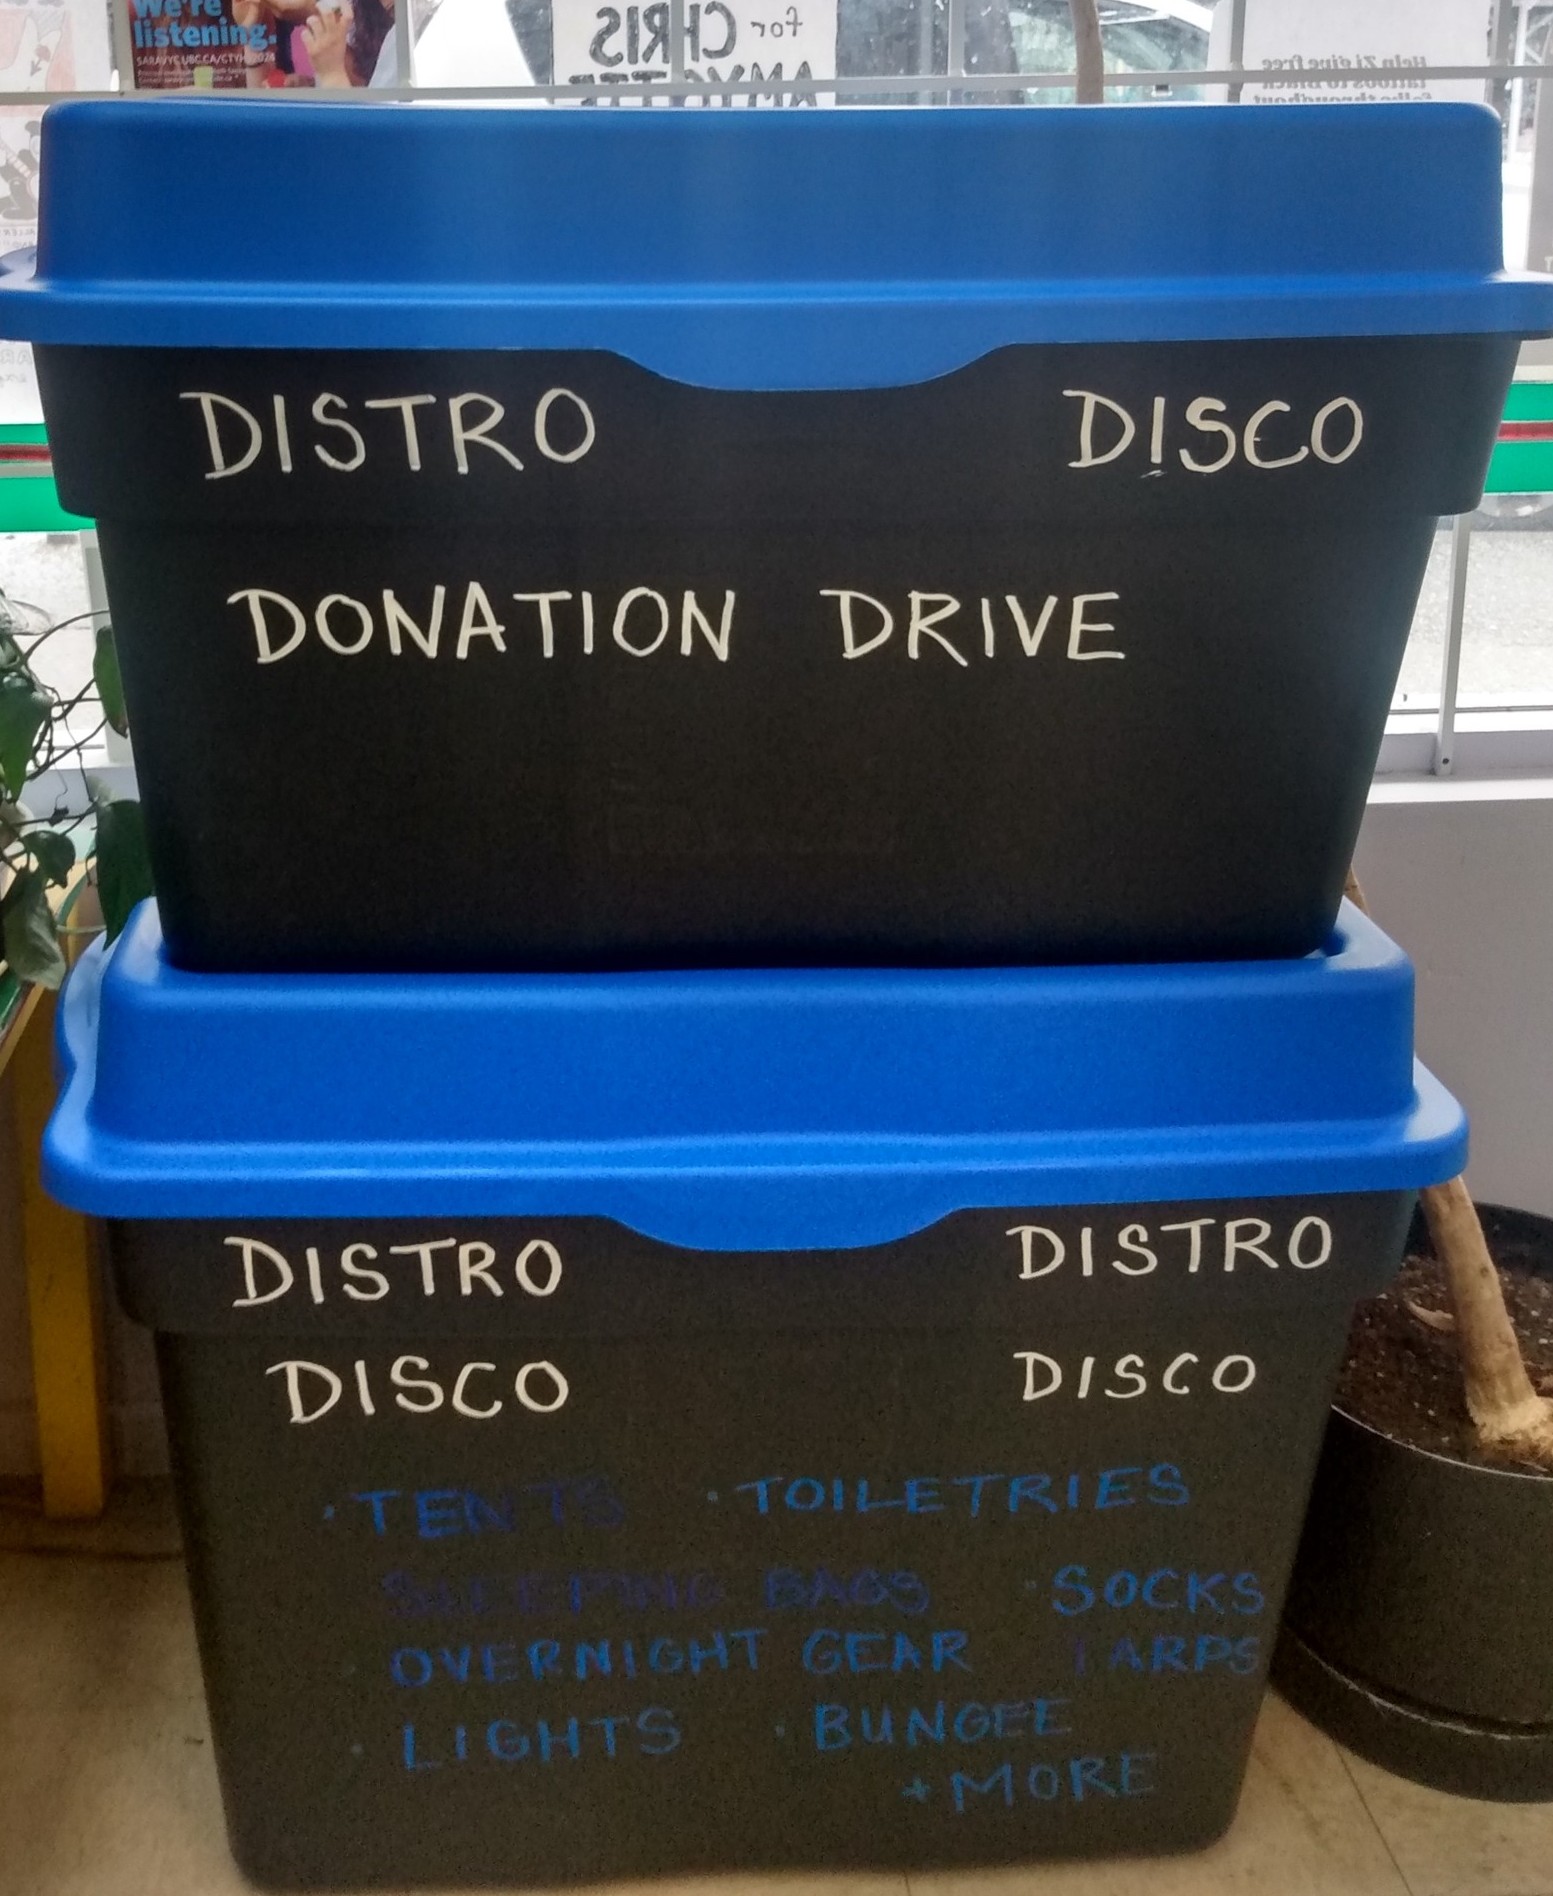 Two stacked black plastic bins with blue lids. Each has the words "DISTRO DISCO DONATION DRIVE" written in white on the front side. The lower bin has a bullet point list of needed donations written in dark blue, with some words smeared: "TENTS, TOILETRIES, SLEEPING BAGS, SOCKS, OVERNIGHT GEAR, TARPS, LIGHTS, BUNGEE + MORE"